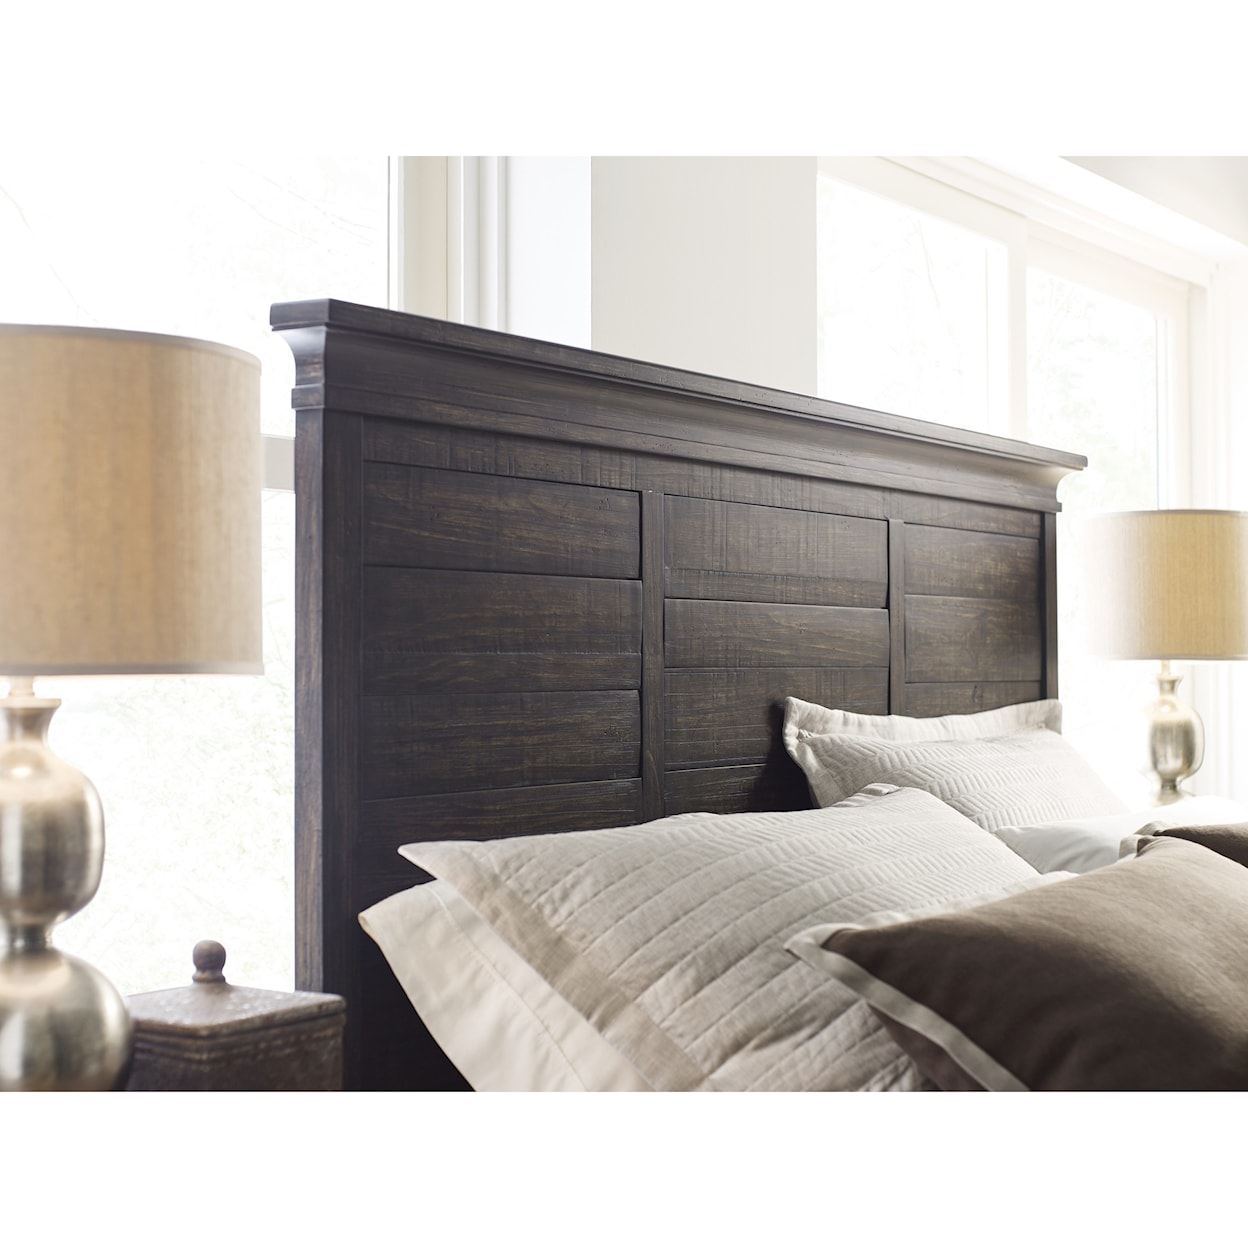 Kincaid Furniture Plank Road Jessup Panel Queen Bed       